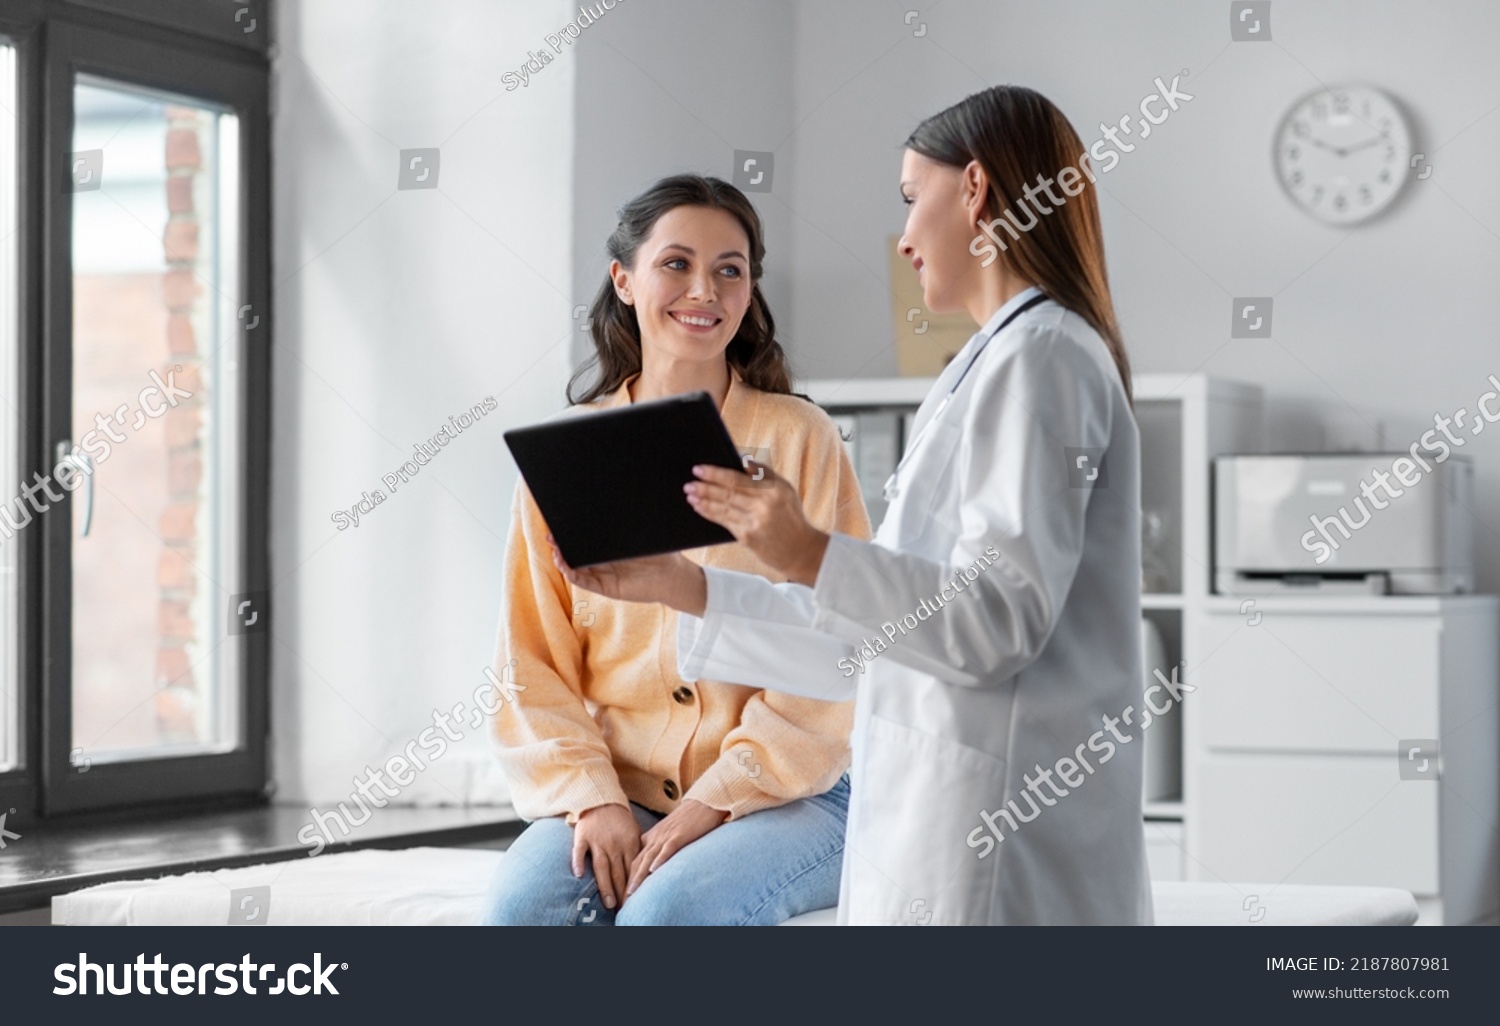 medicine, healthcare and people concept - female doctor with tablet pc computer talking to smiling woman patient at hospital #2187807981